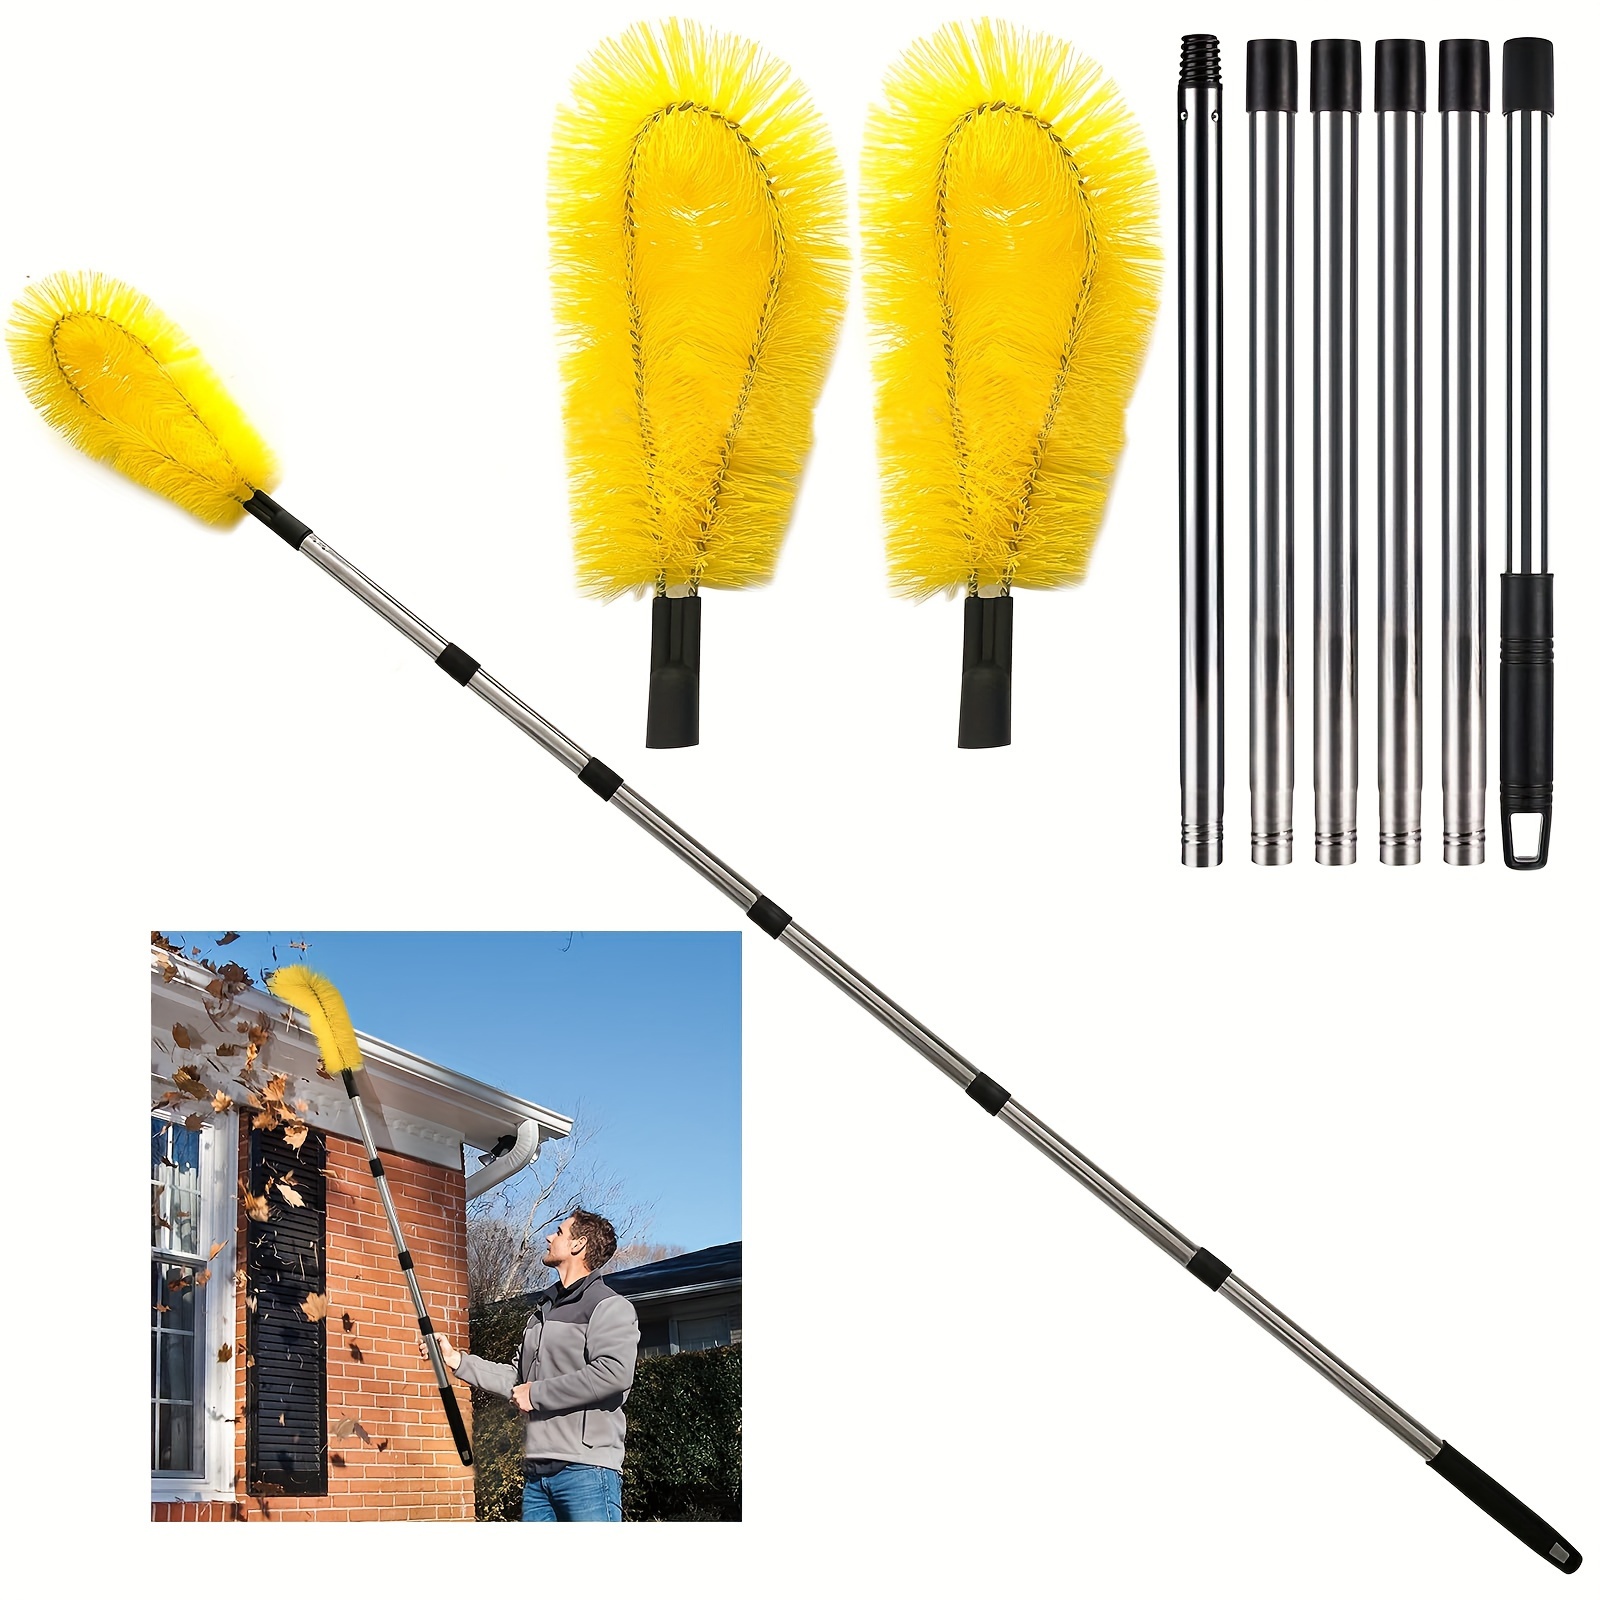 

8pcs Gutter Cleaning Tools From The Ground, Roofing Tool Rain Gutter Guard Cleaner Tool, Easy Remove Leaves And Debris From The Ground